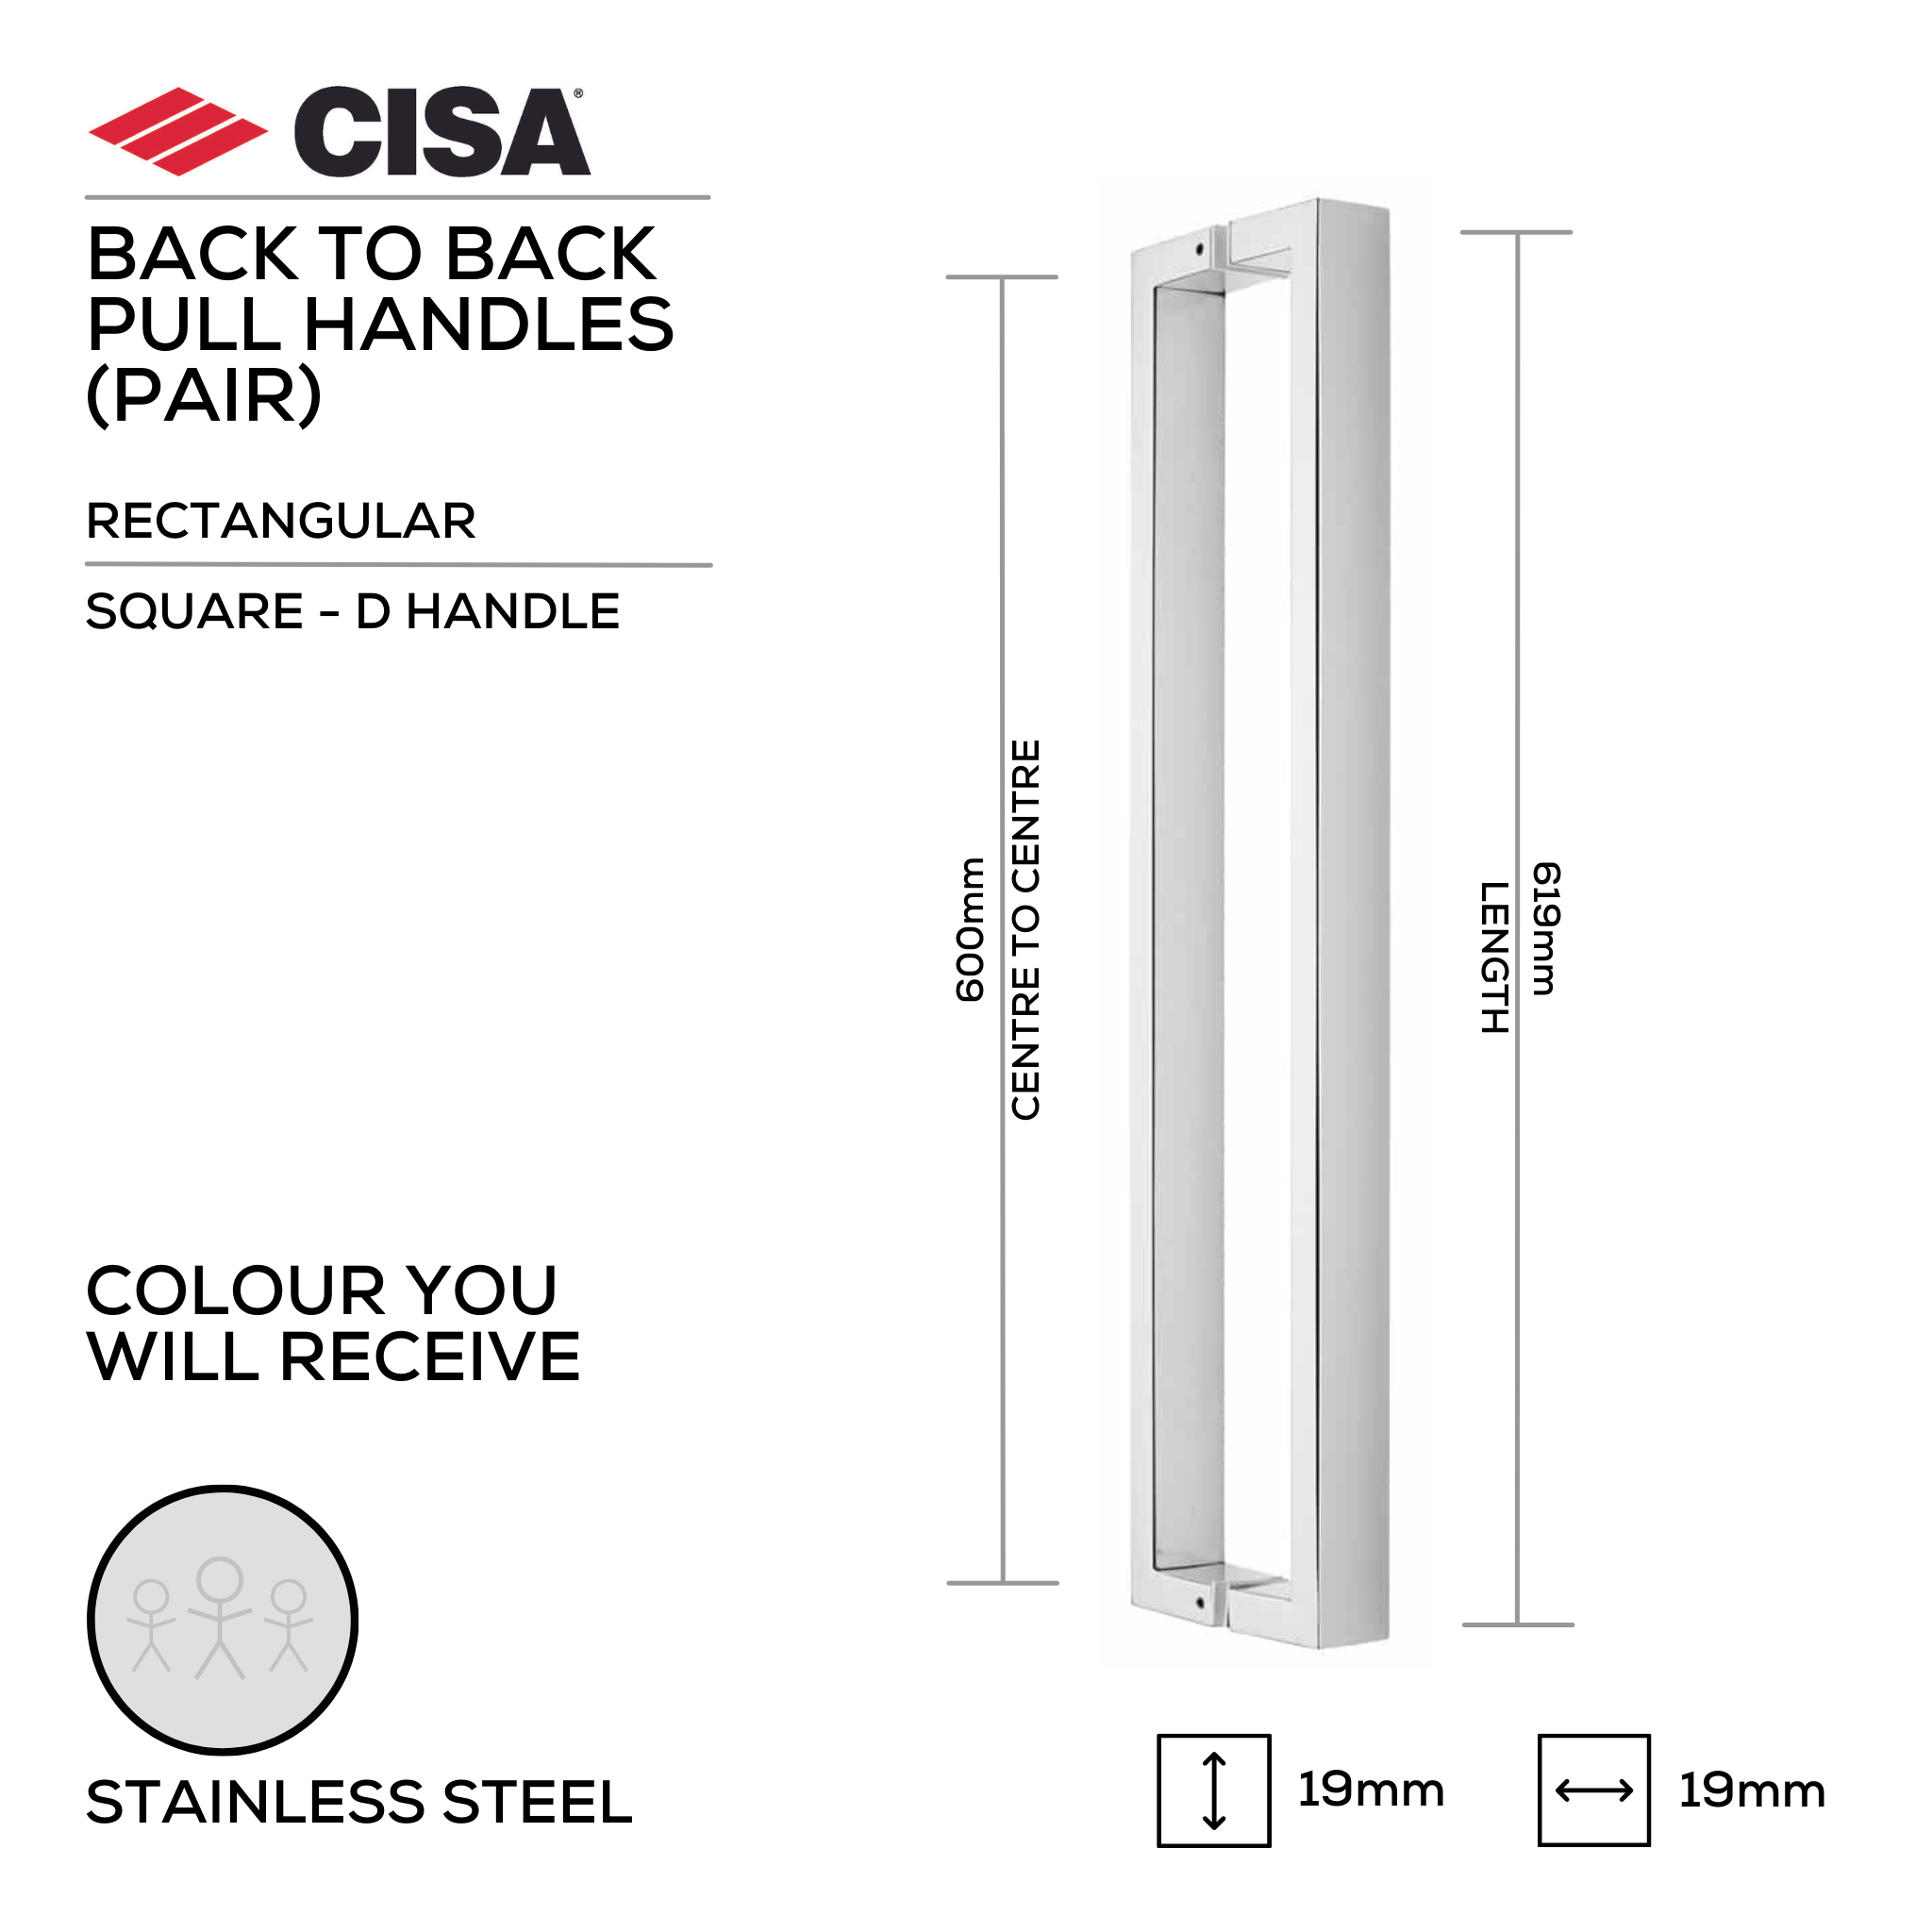 FP.SD04.BB.SS, Pull Handle, Square, D Handle, BTB, 19mm (d) x 619mm (l) x 600mm (ctc), Stainless Steel, CISA